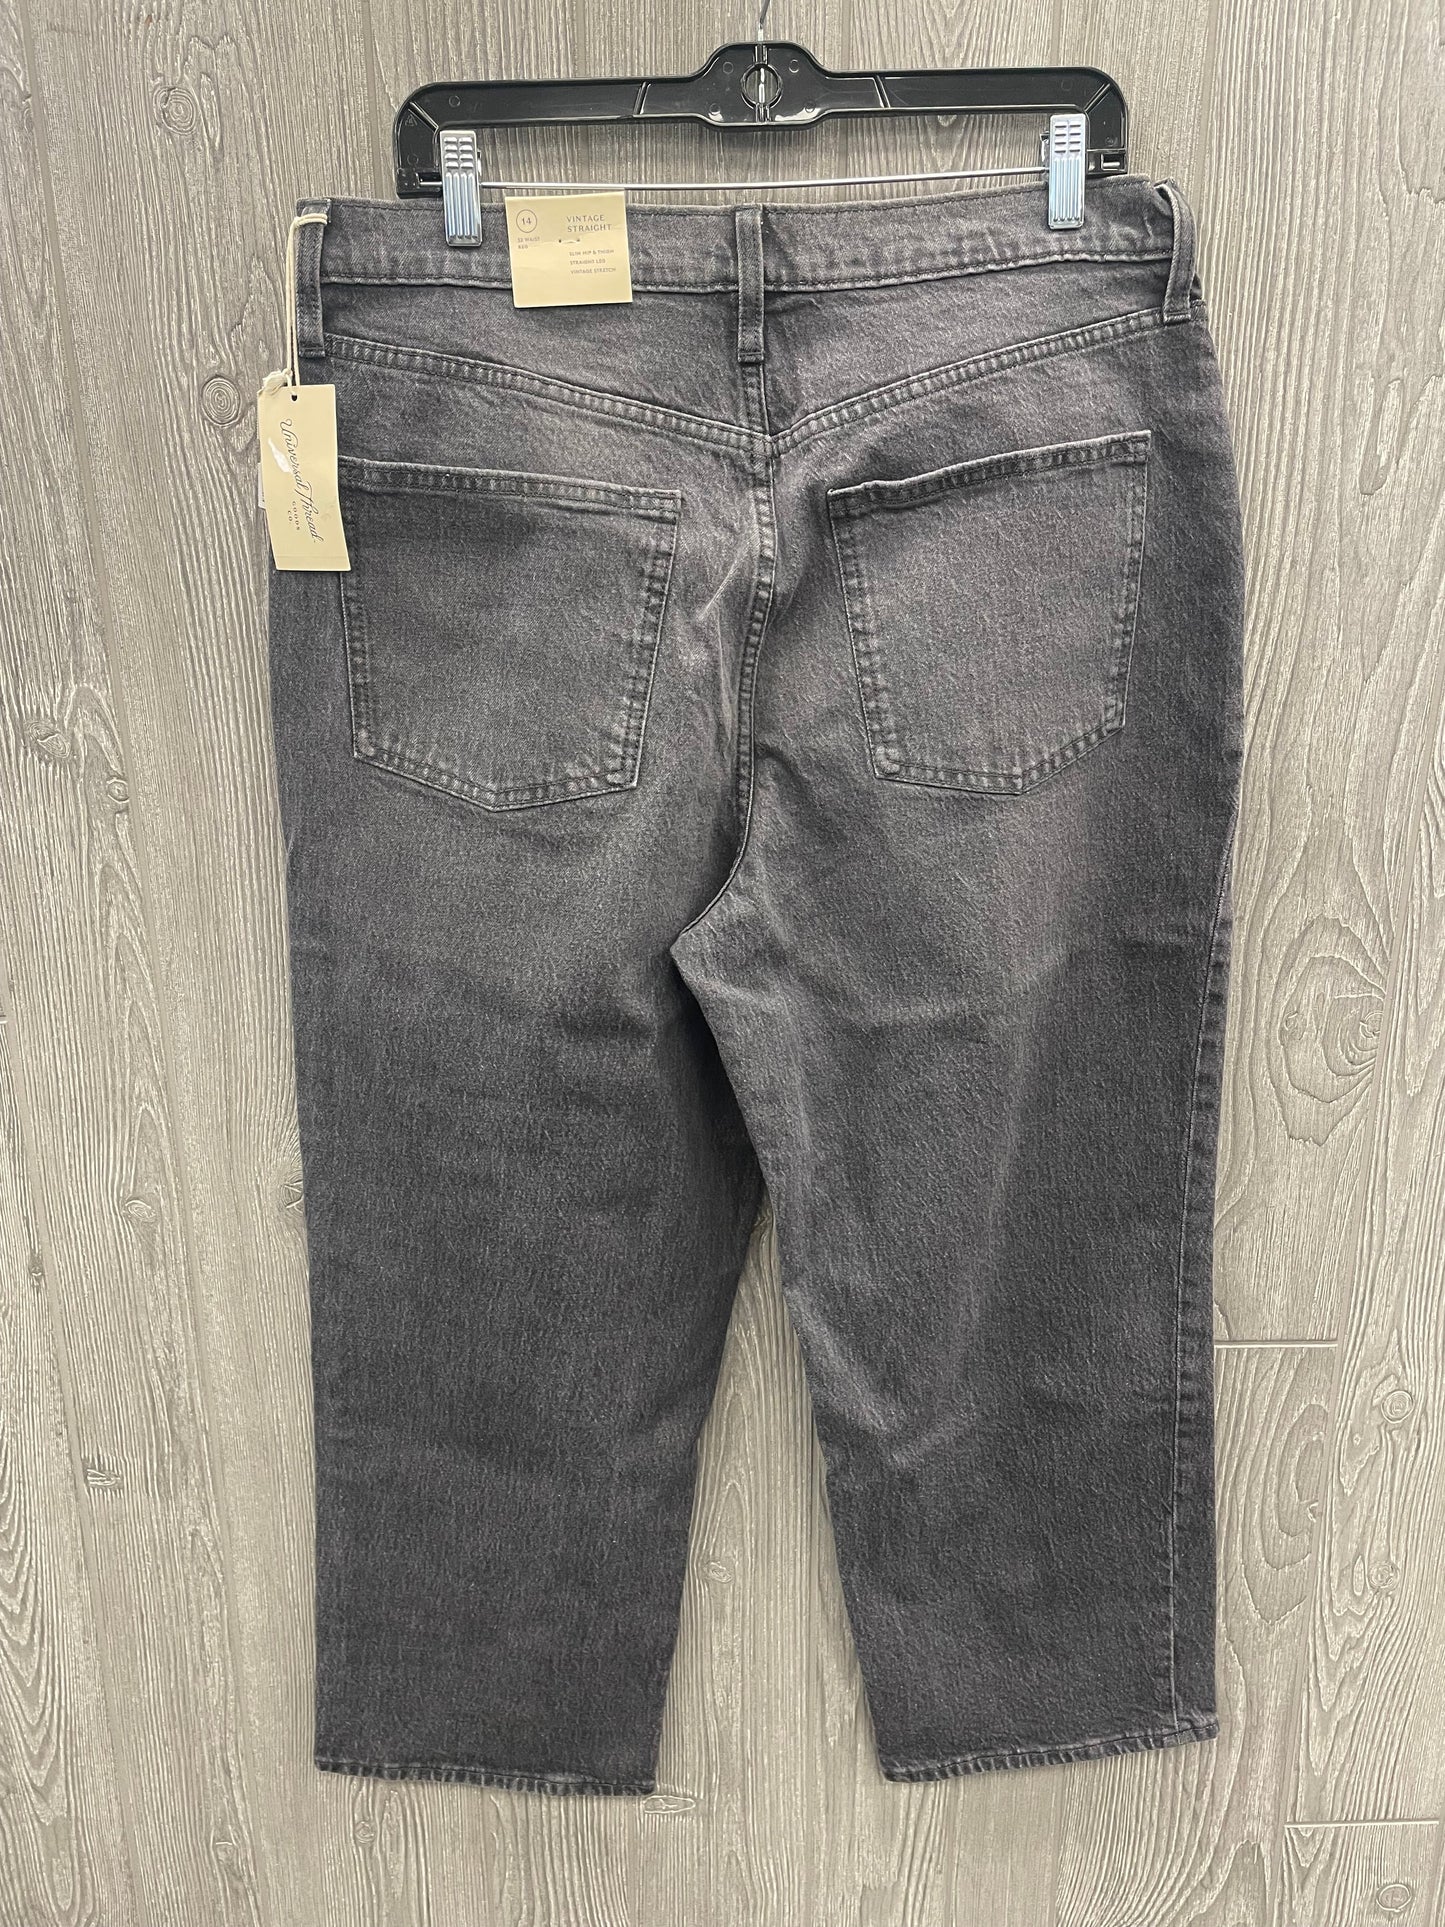 Jeans Straight By Universal Thread  Size: 14